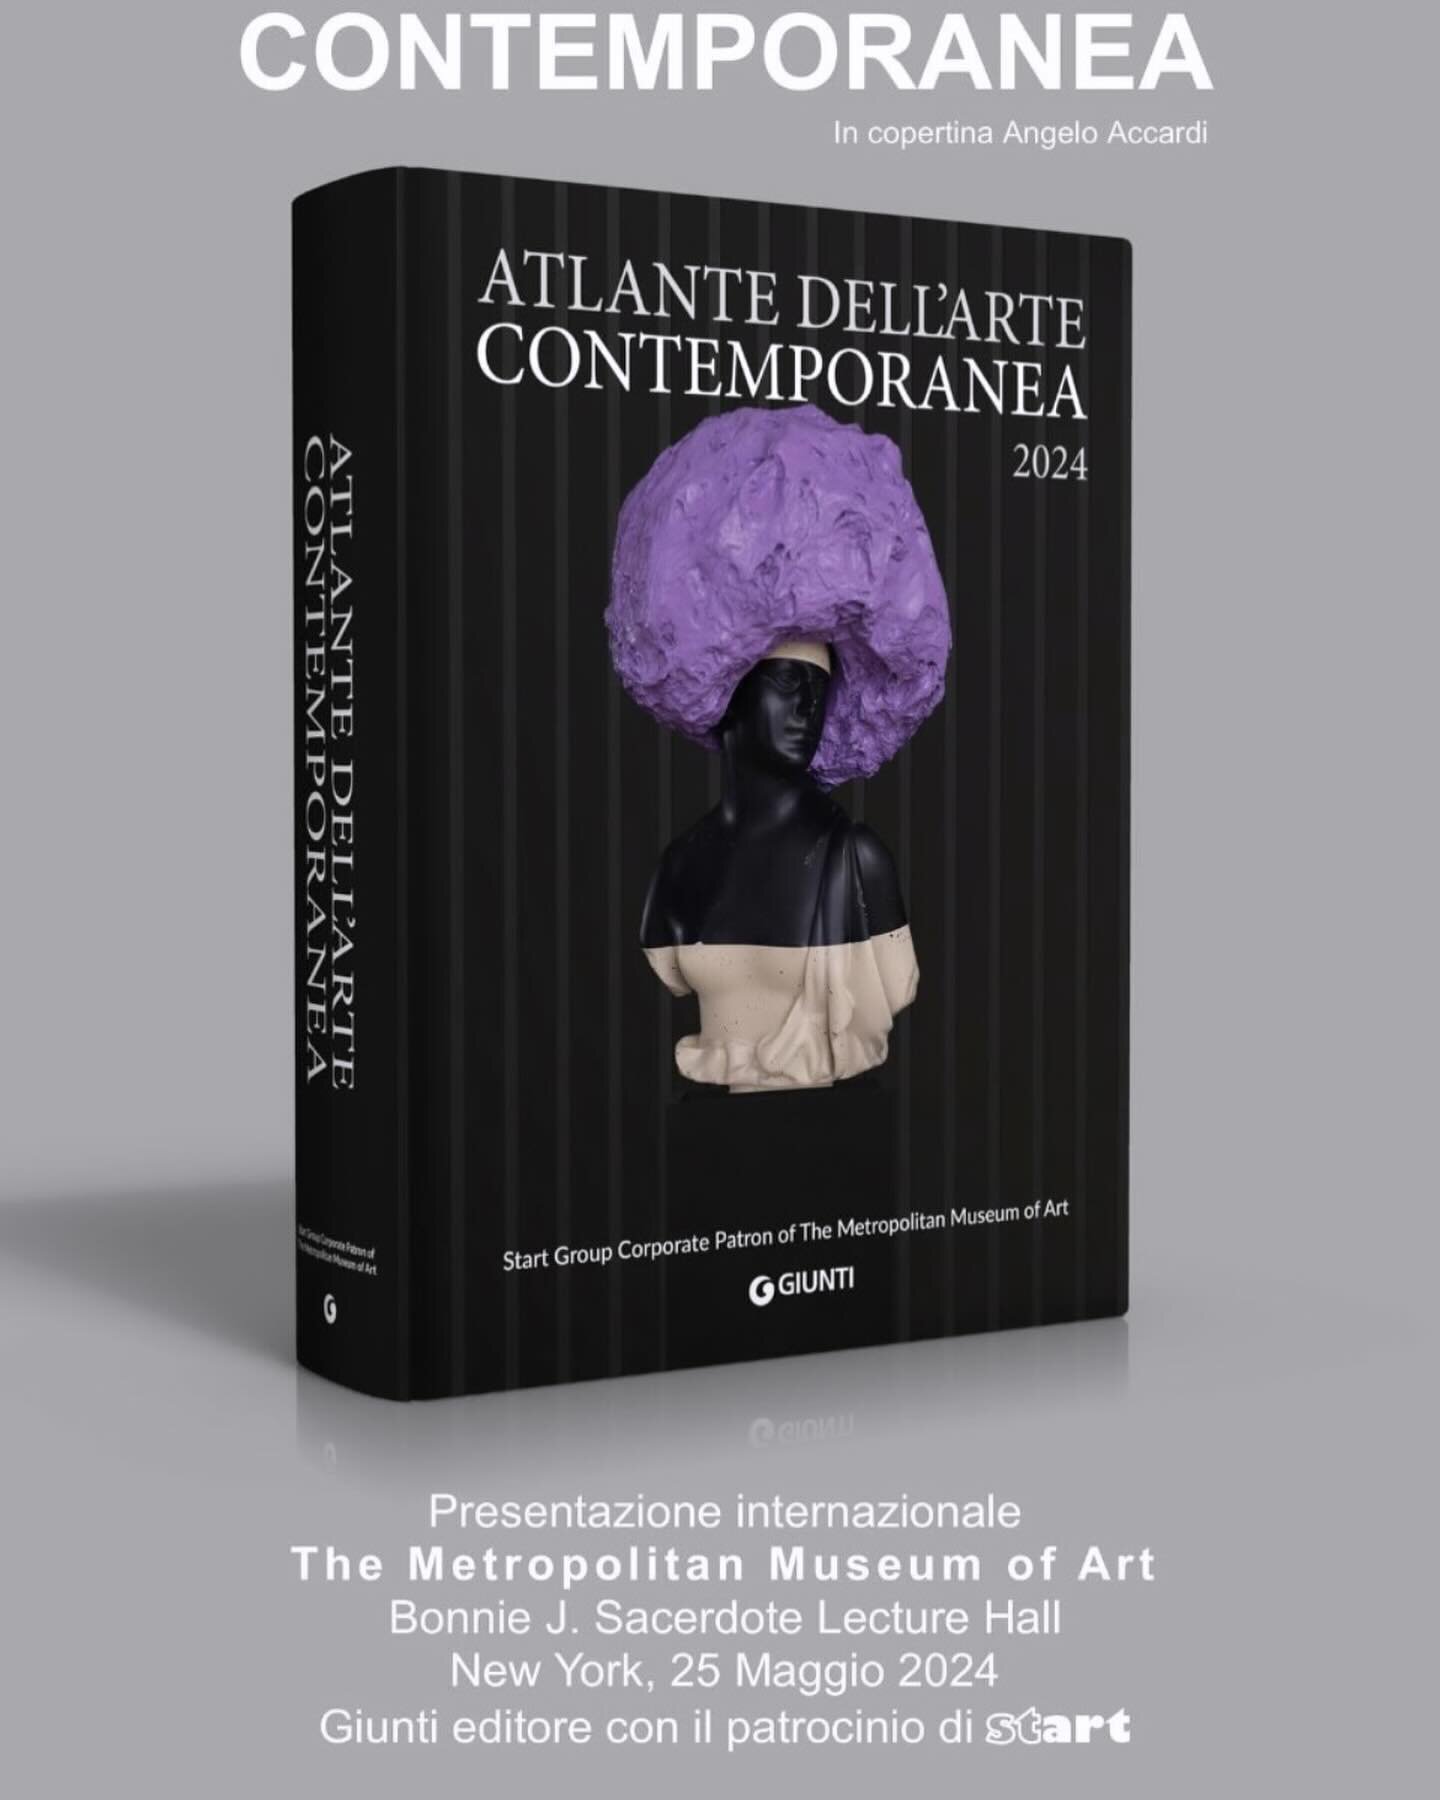 Exciting News! Soon there will be the presentation of ATLANTE DELL ARTE CONTEMPORANEA 2024 @metmuseum in NYC.
What a pleasure! 👏 I am represented with &lsquo;IN THE COCOON&rsquo;, one of my works in this wonderful volume. Grazie Mille💜

#art #artbo